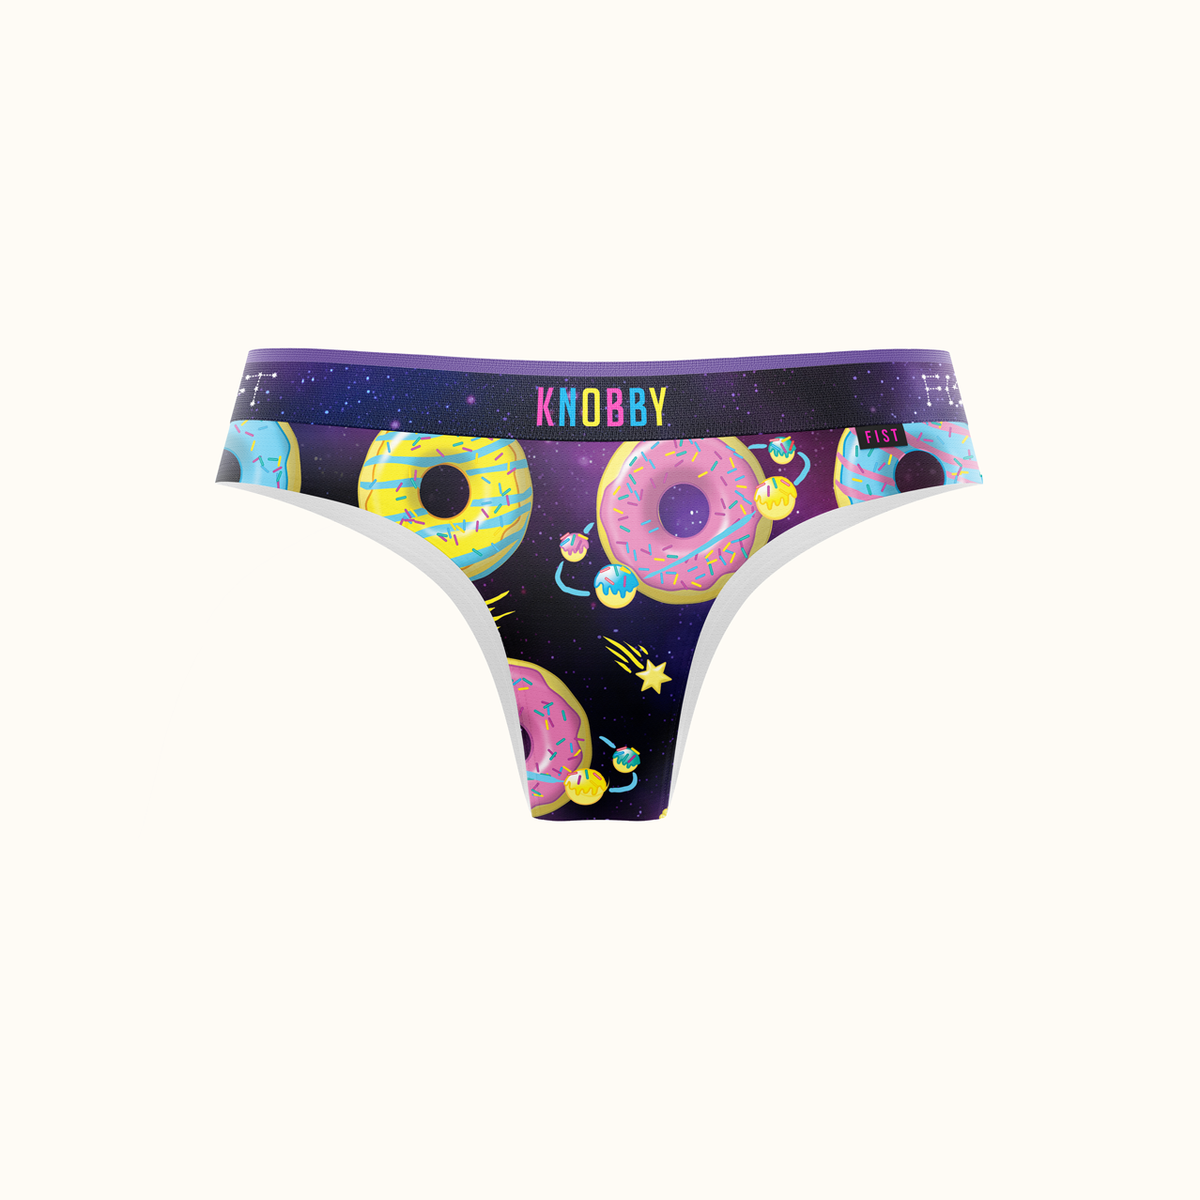 Knobby - In Brazil they just call these undies 🇧🇷 Have you tried